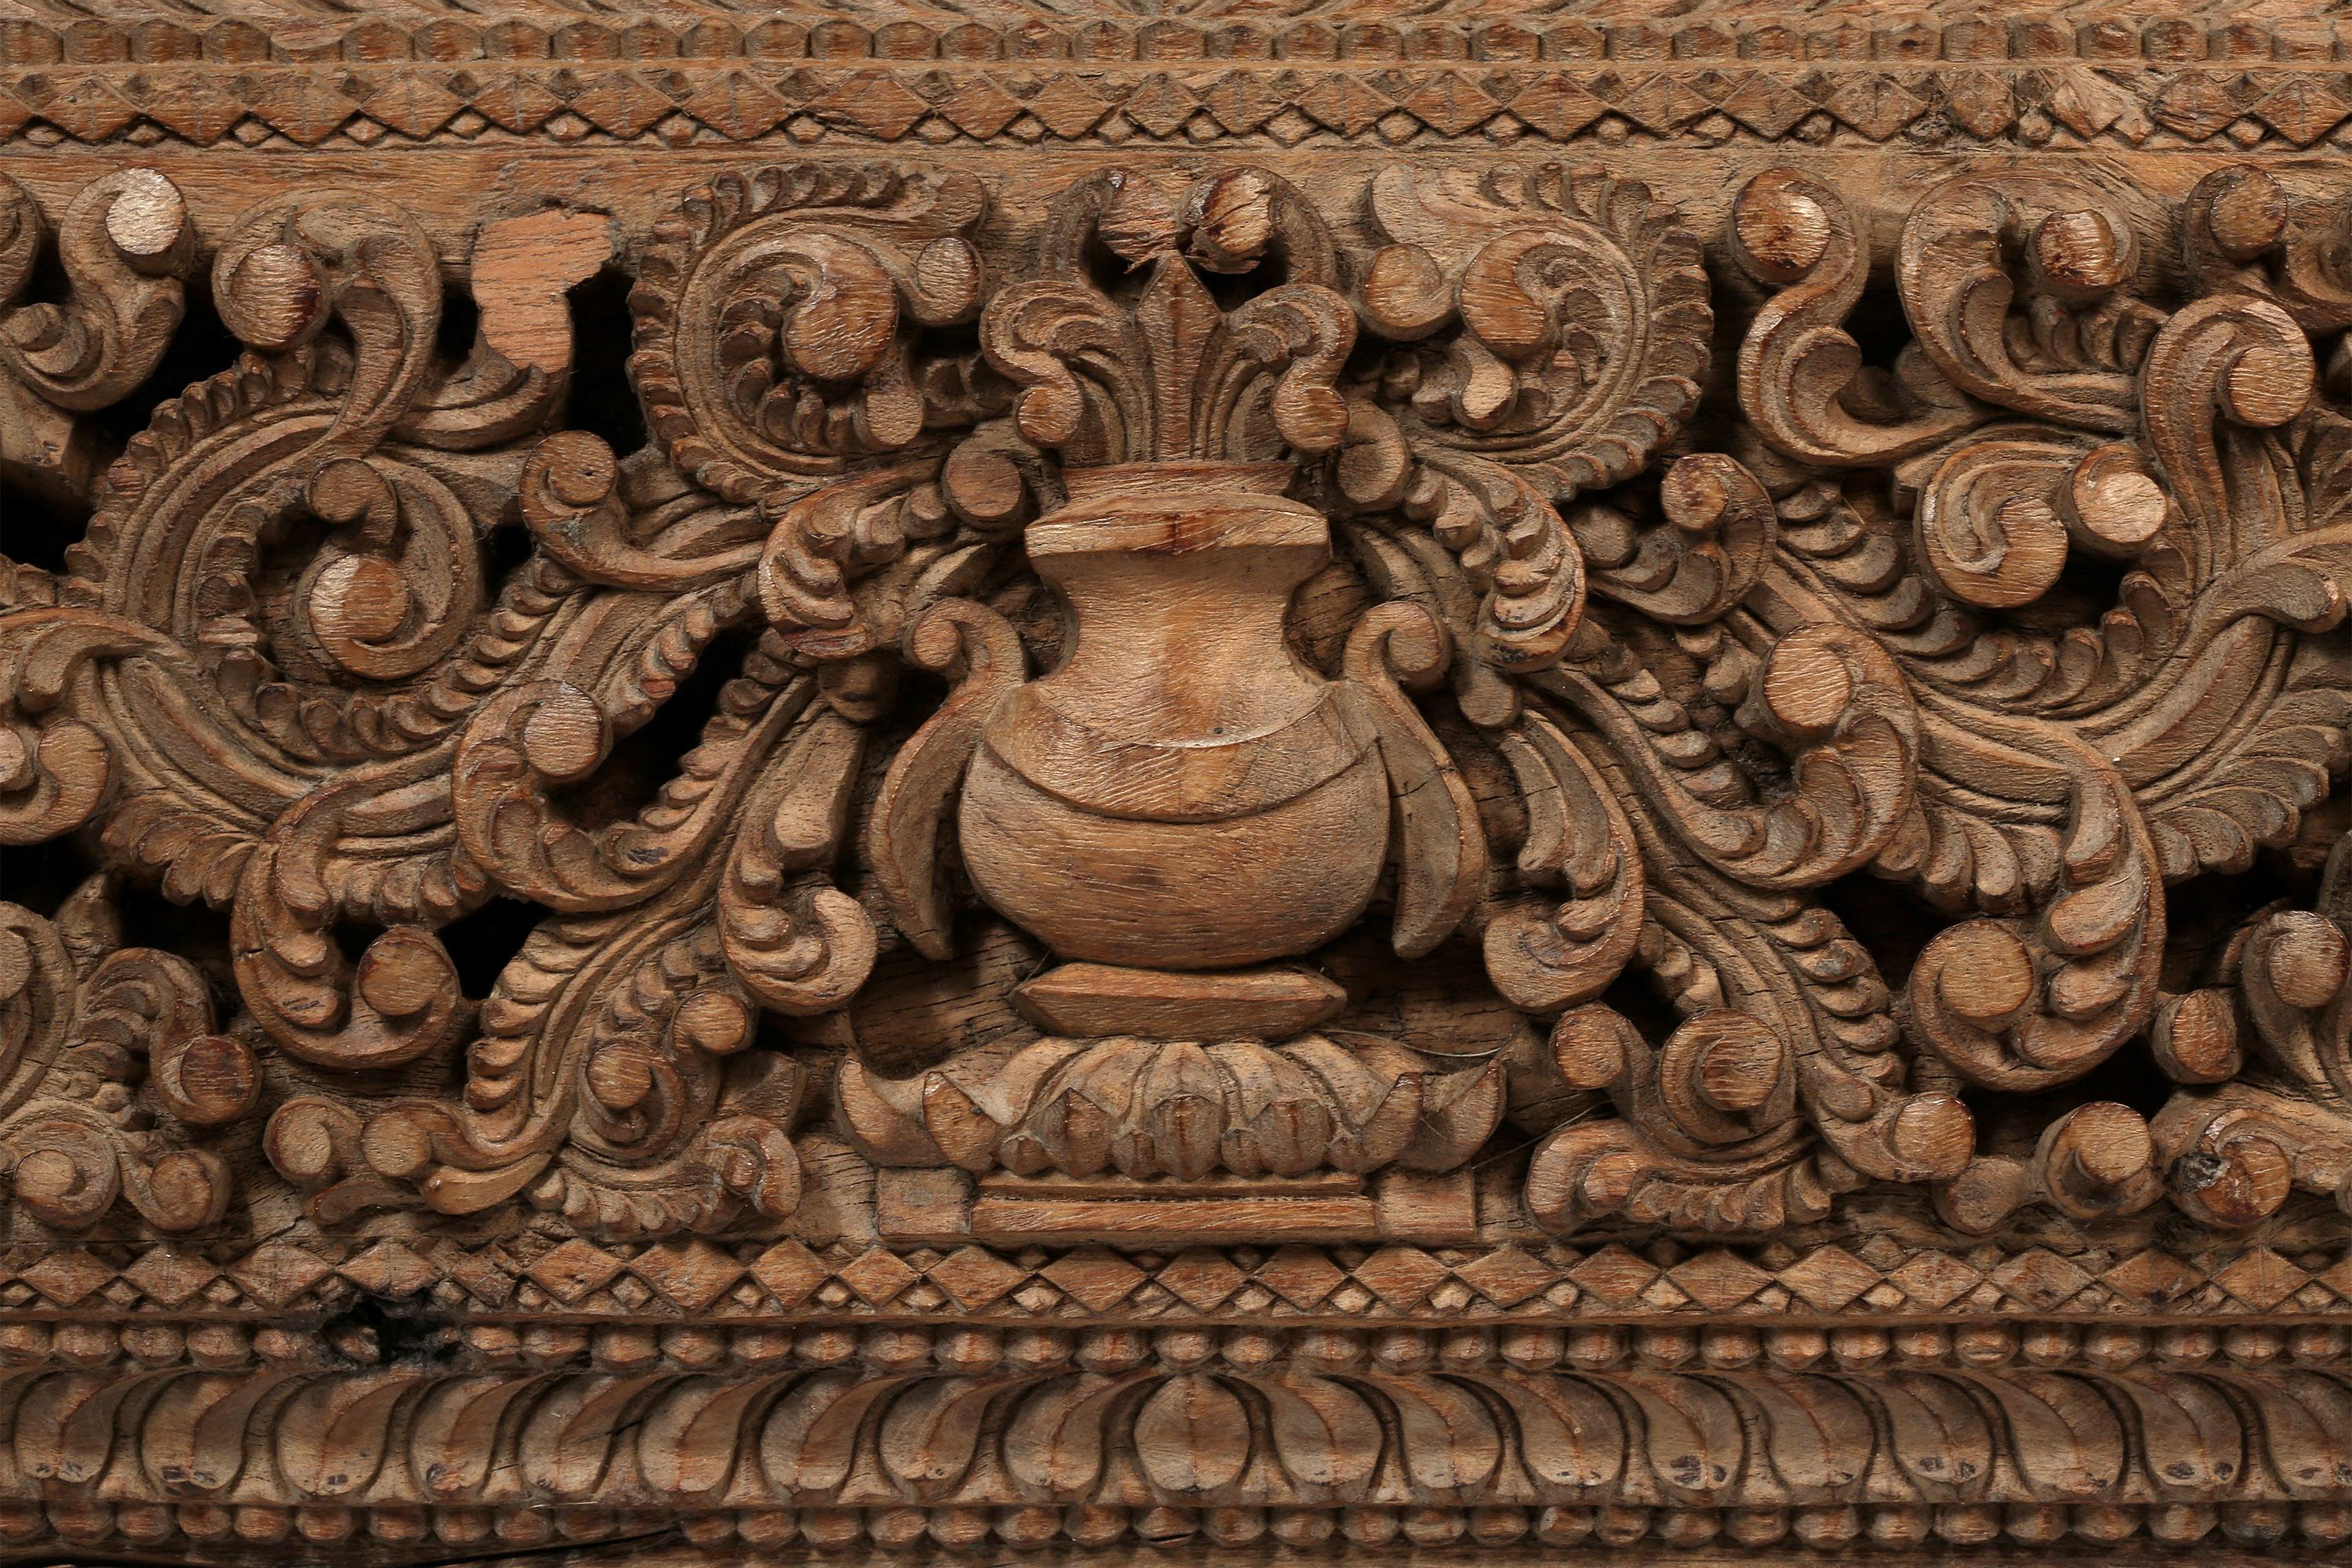 Wooden Lintel Frieze carved in deep relief with two stylized birds, both facing inwards towards an offering box, surrounded by scrolling tendrils, and bordered by geometric carvings. South India, late 19th-20th century.